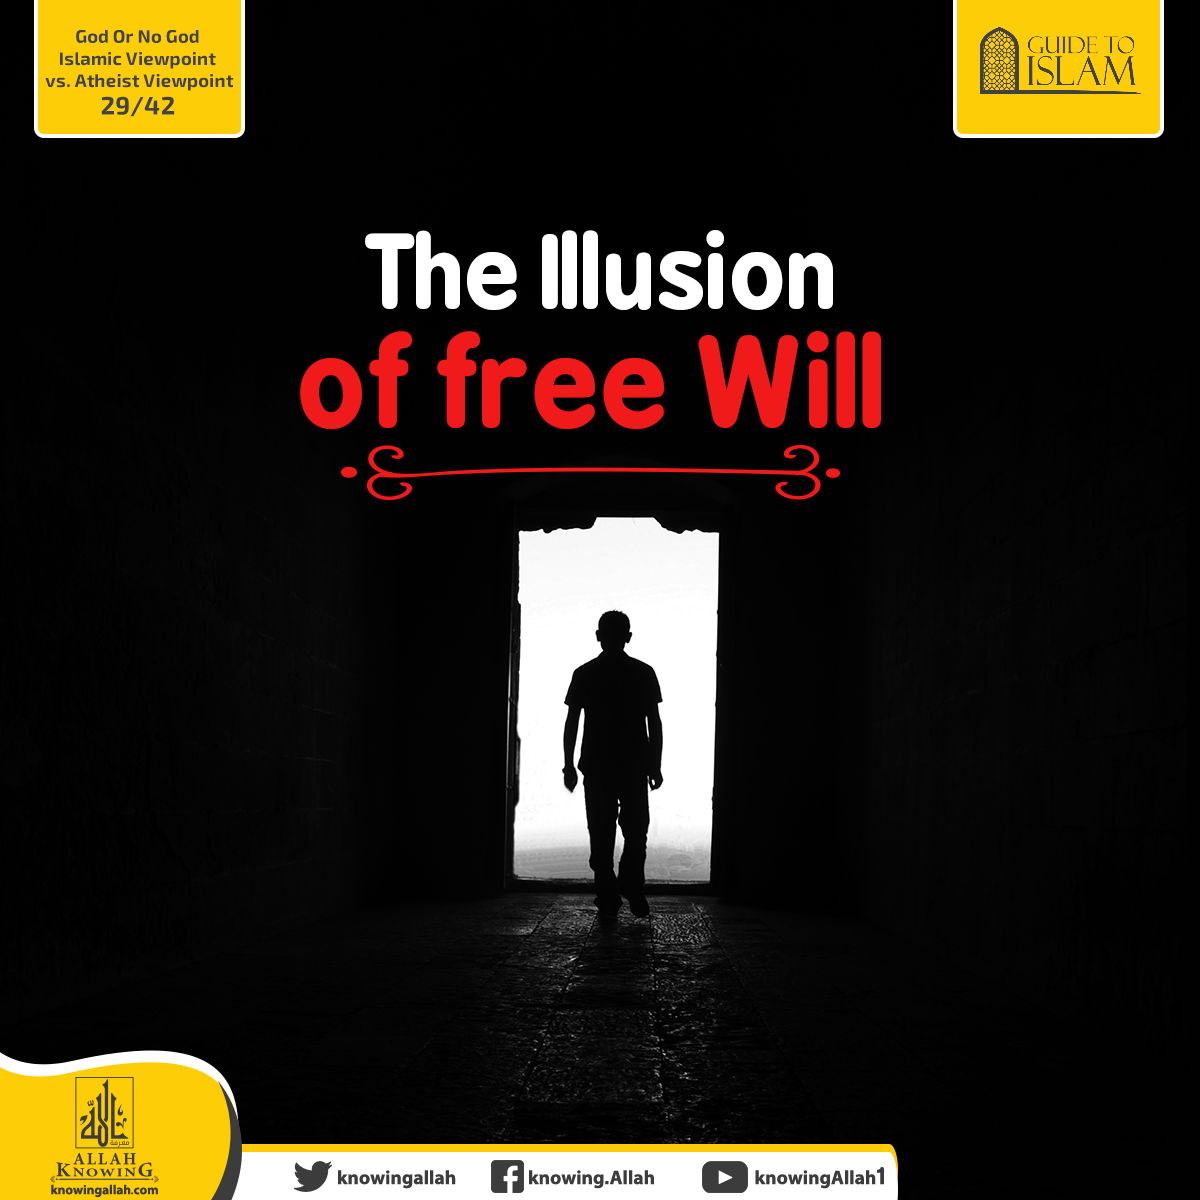 The Illusion of free Will